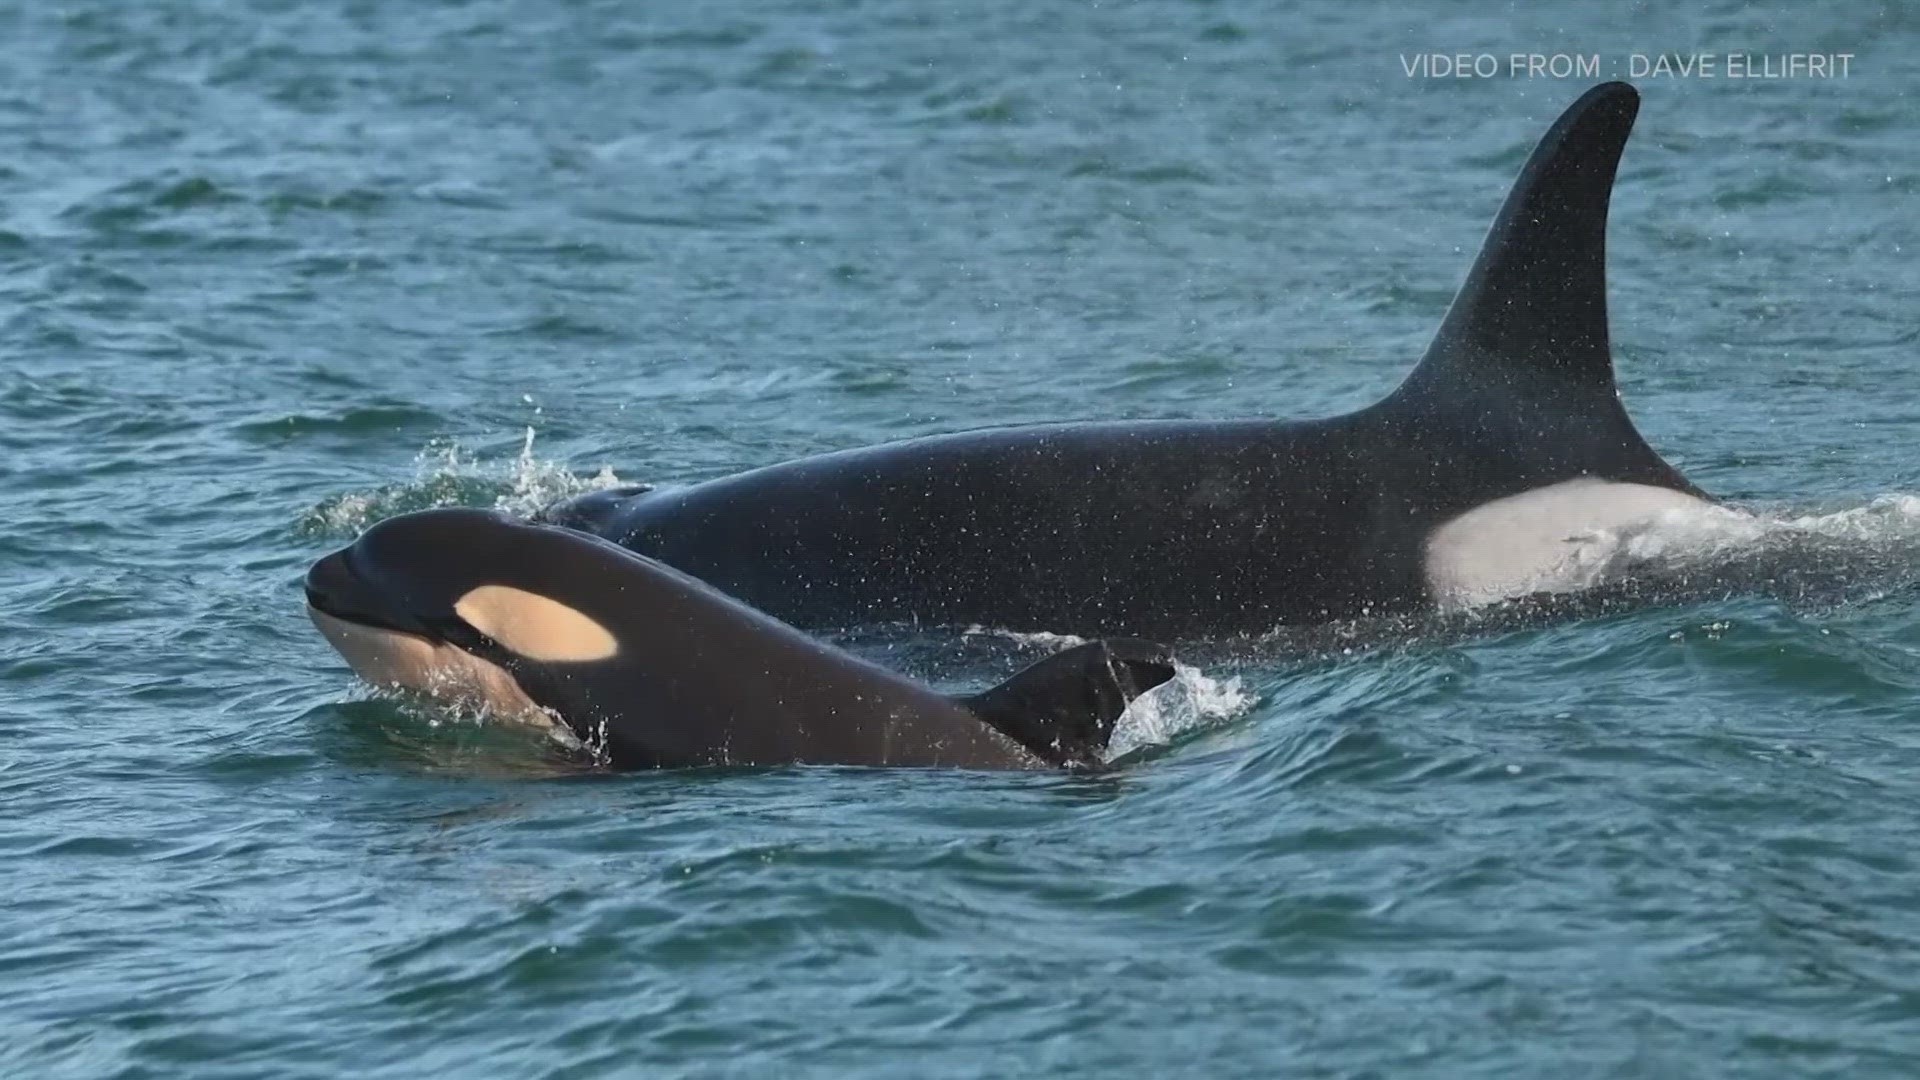 Killer whales have often been considered one species, but a new report is outlining the distinct differences between Resident and Bigg's species.